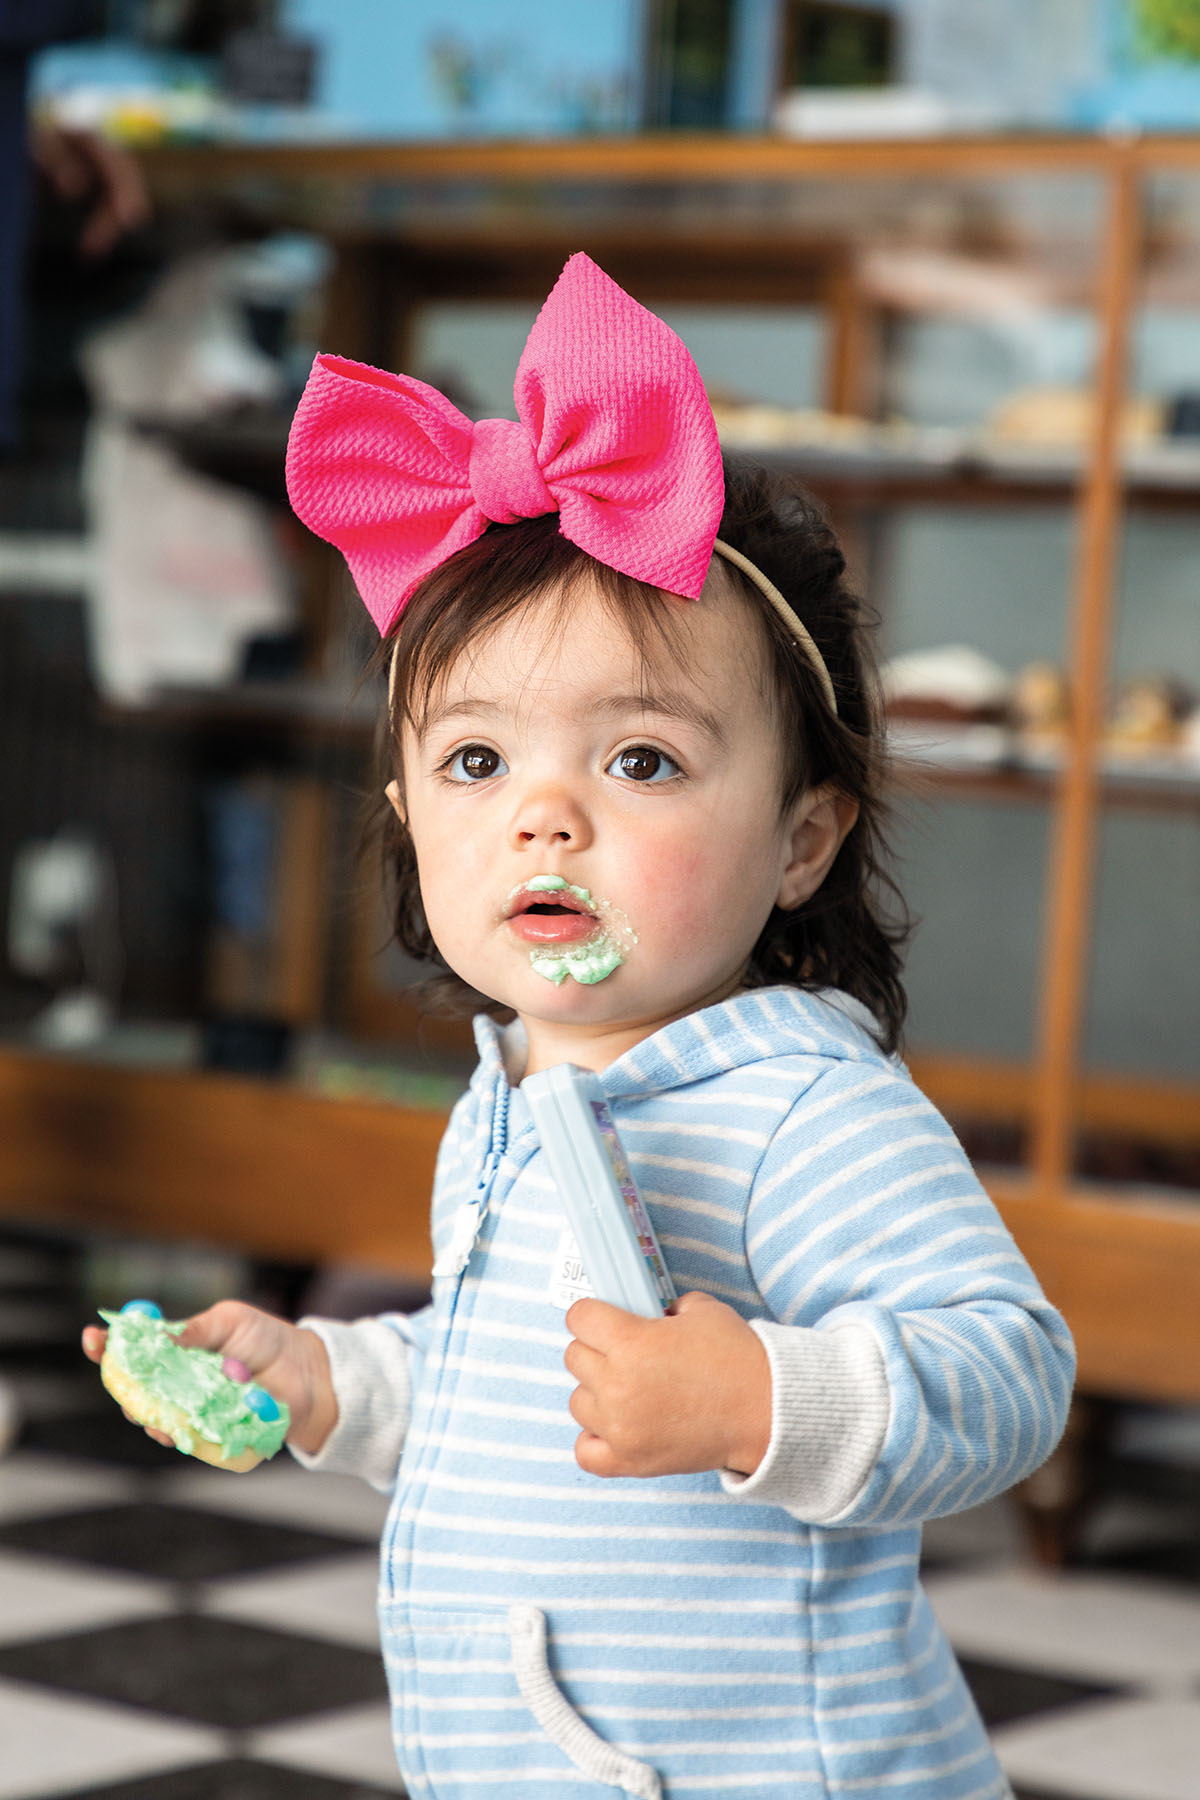 A toddler wearing a bright pink bow holds a cookie in her left hand